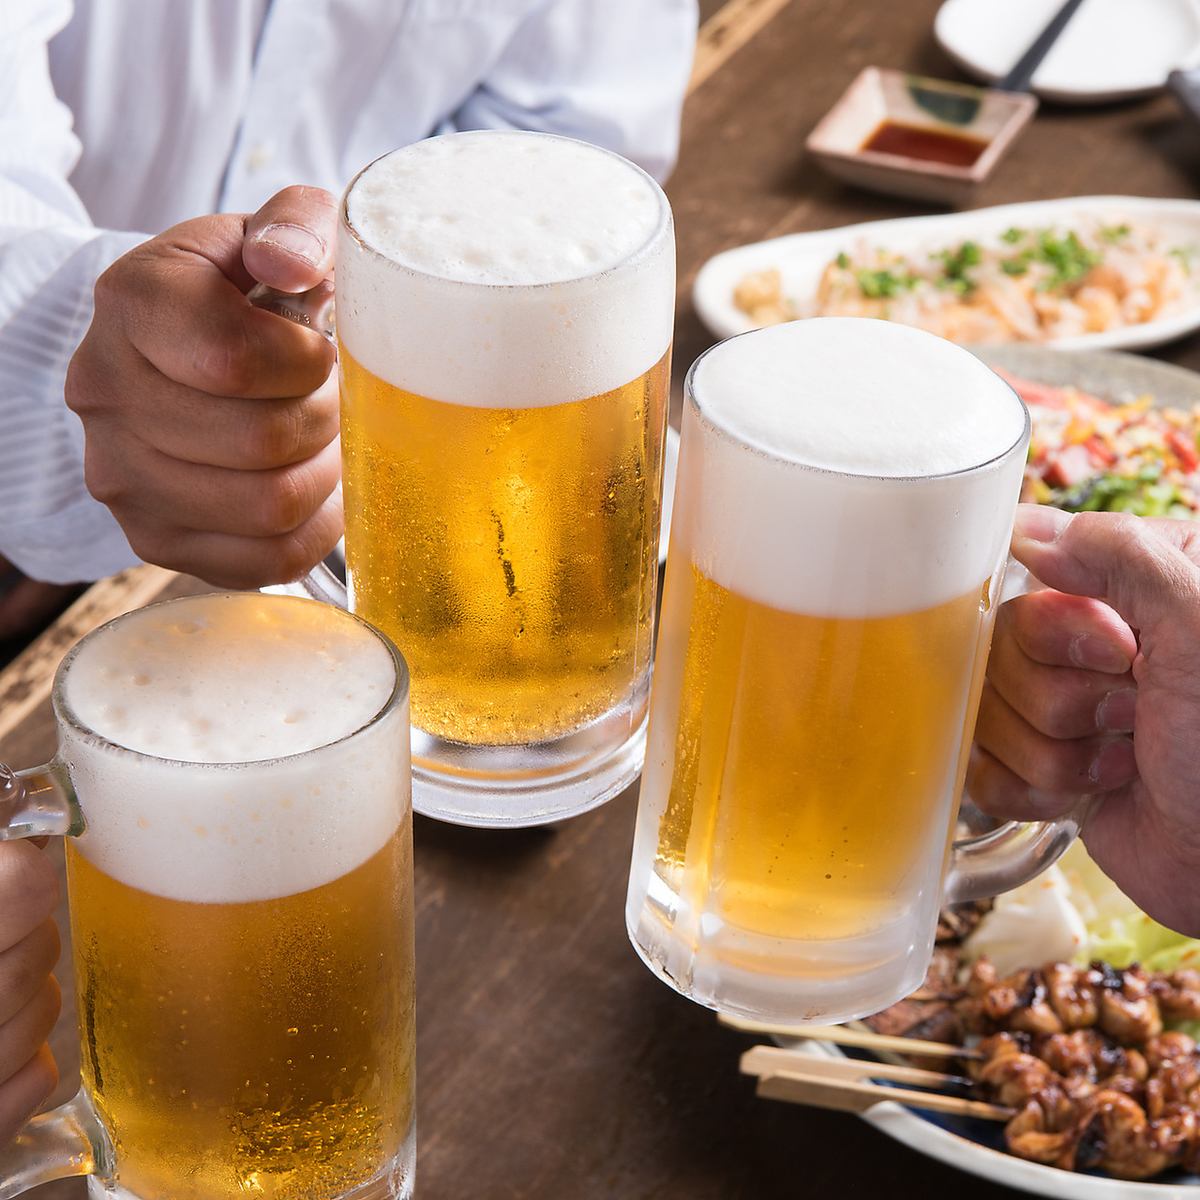 All-you-can-drink for 2 hours starts at 1,500 JPY (incl. tax)!